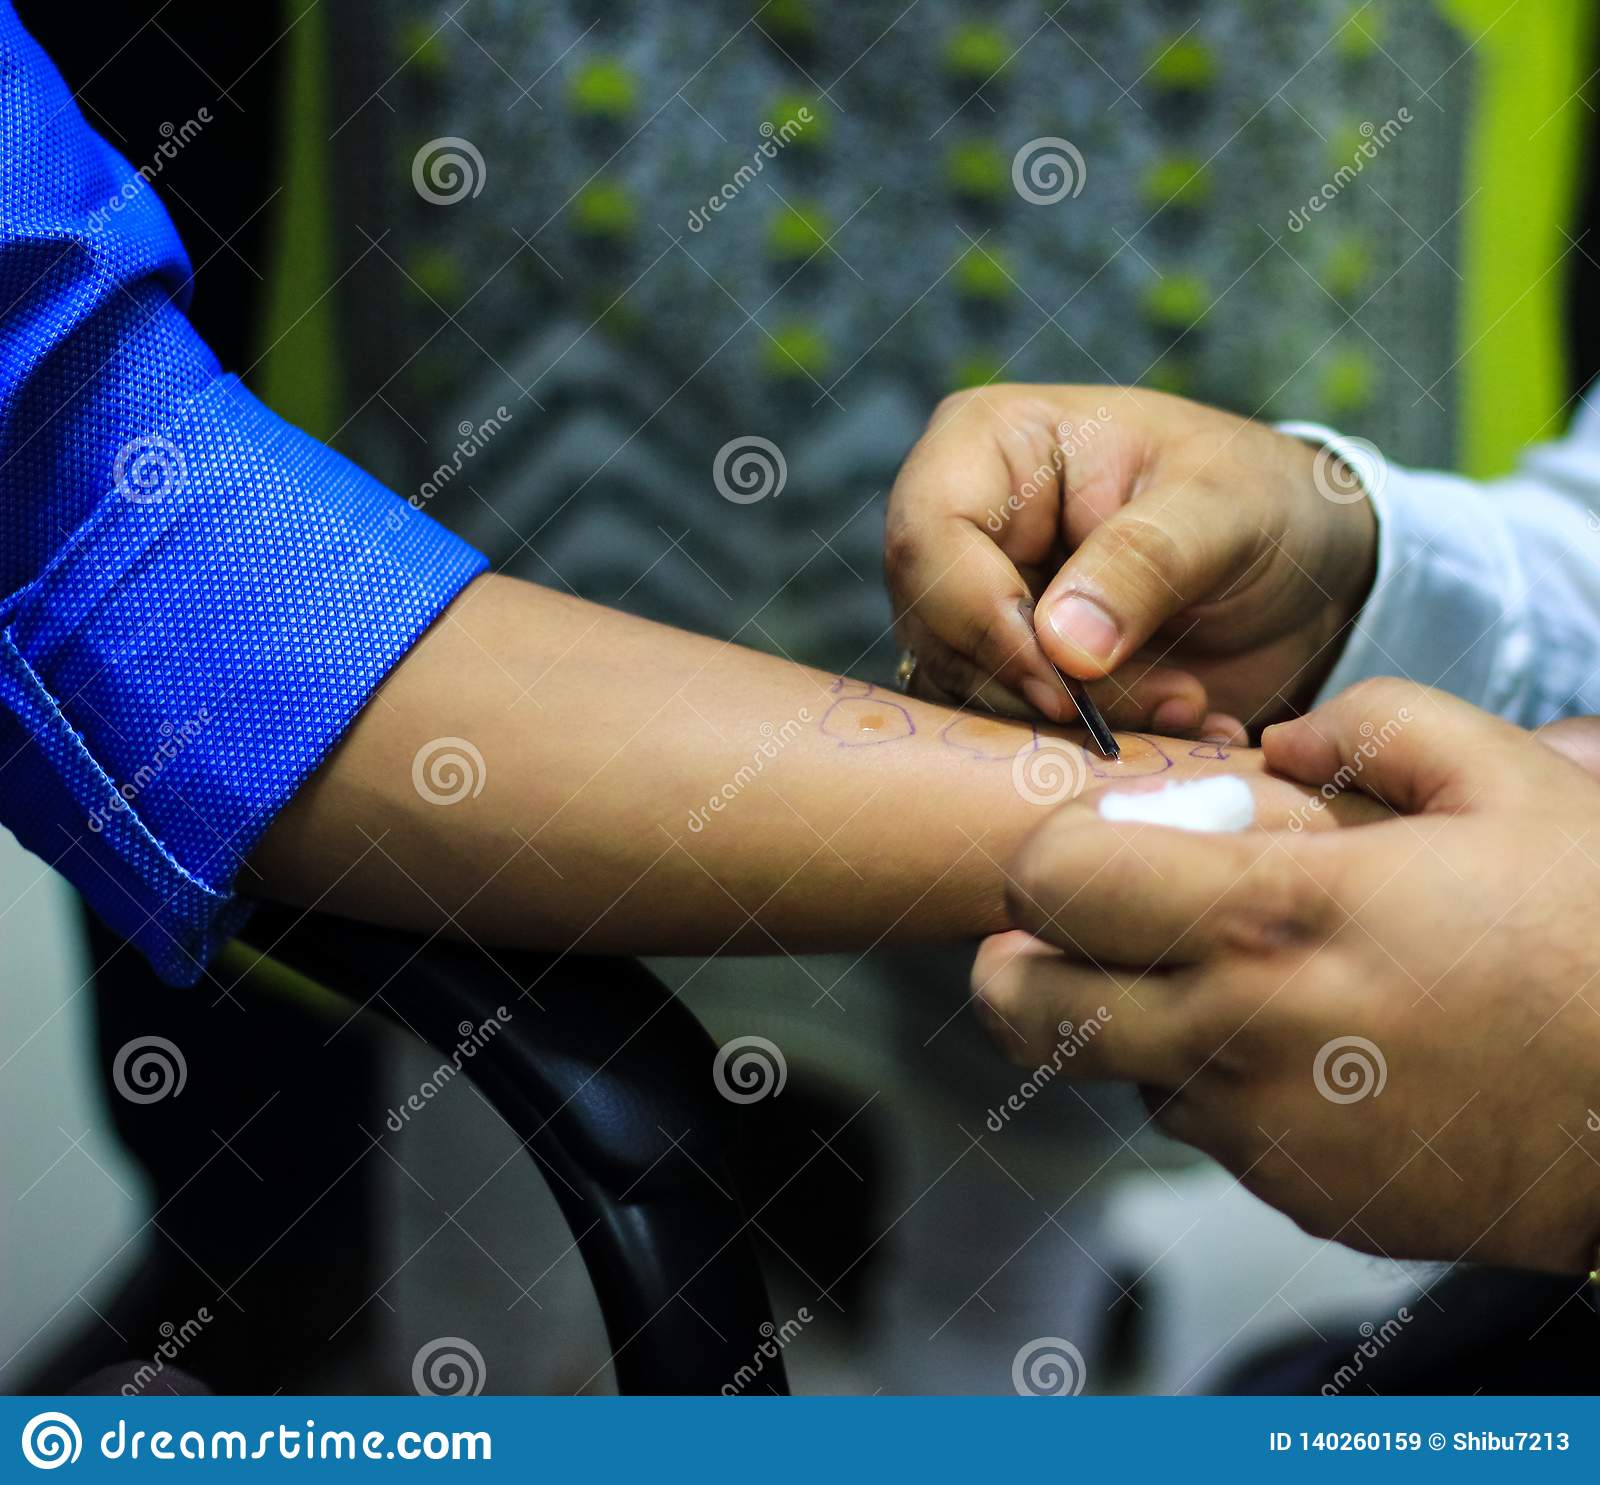 Skin Allergy Test Preparation By Doctor On A Patient Hand Using Lancet ...